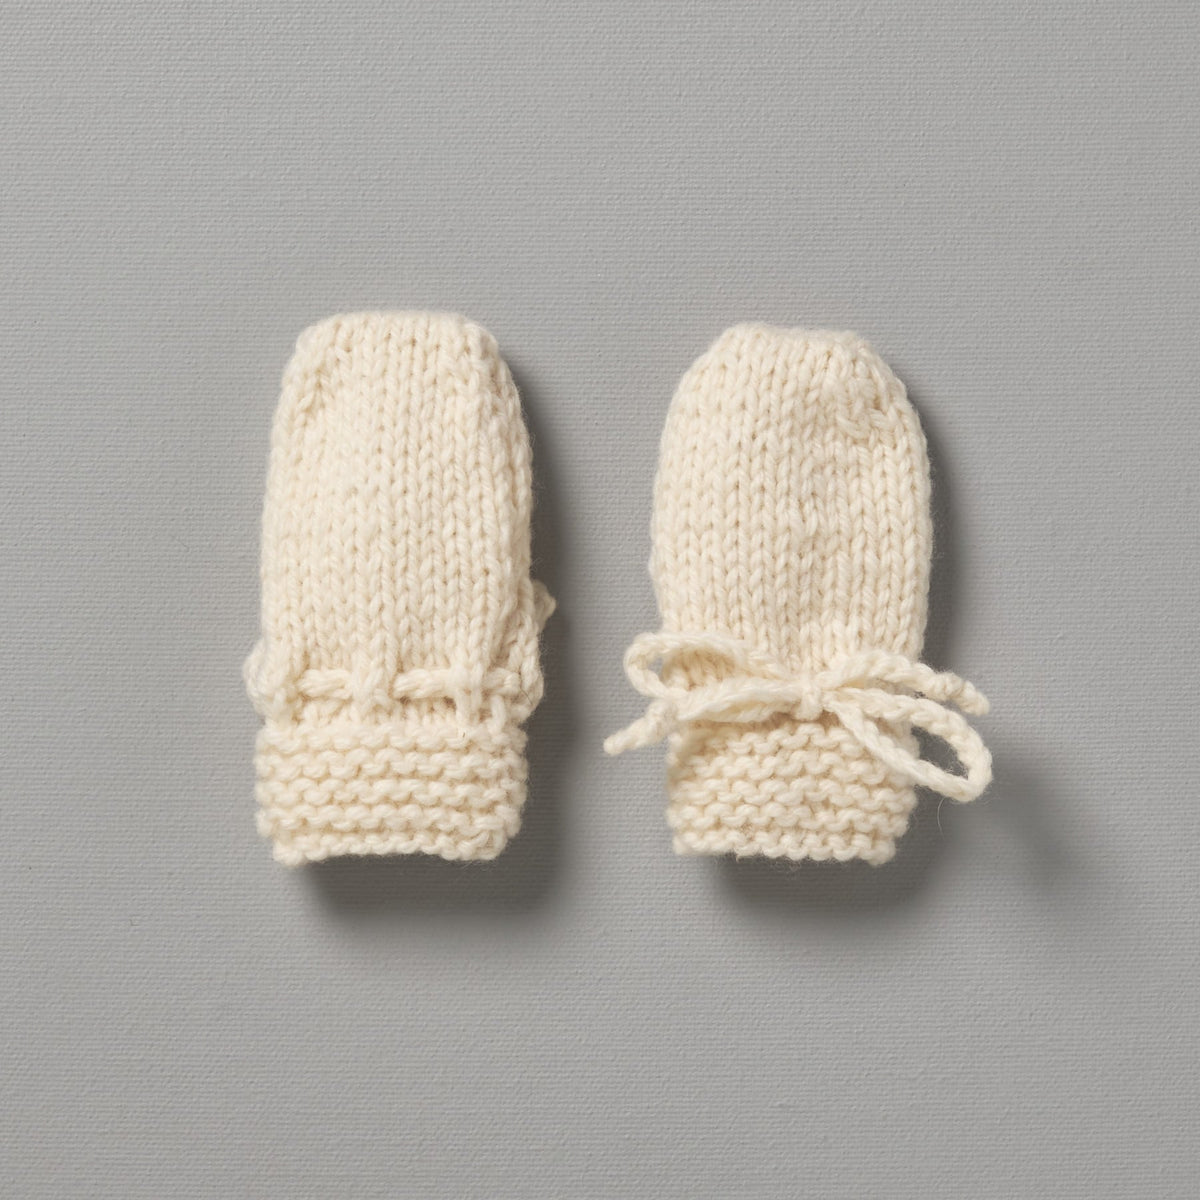 Two Weebits Hand Knitted Mittens - Natural on a grey surface.